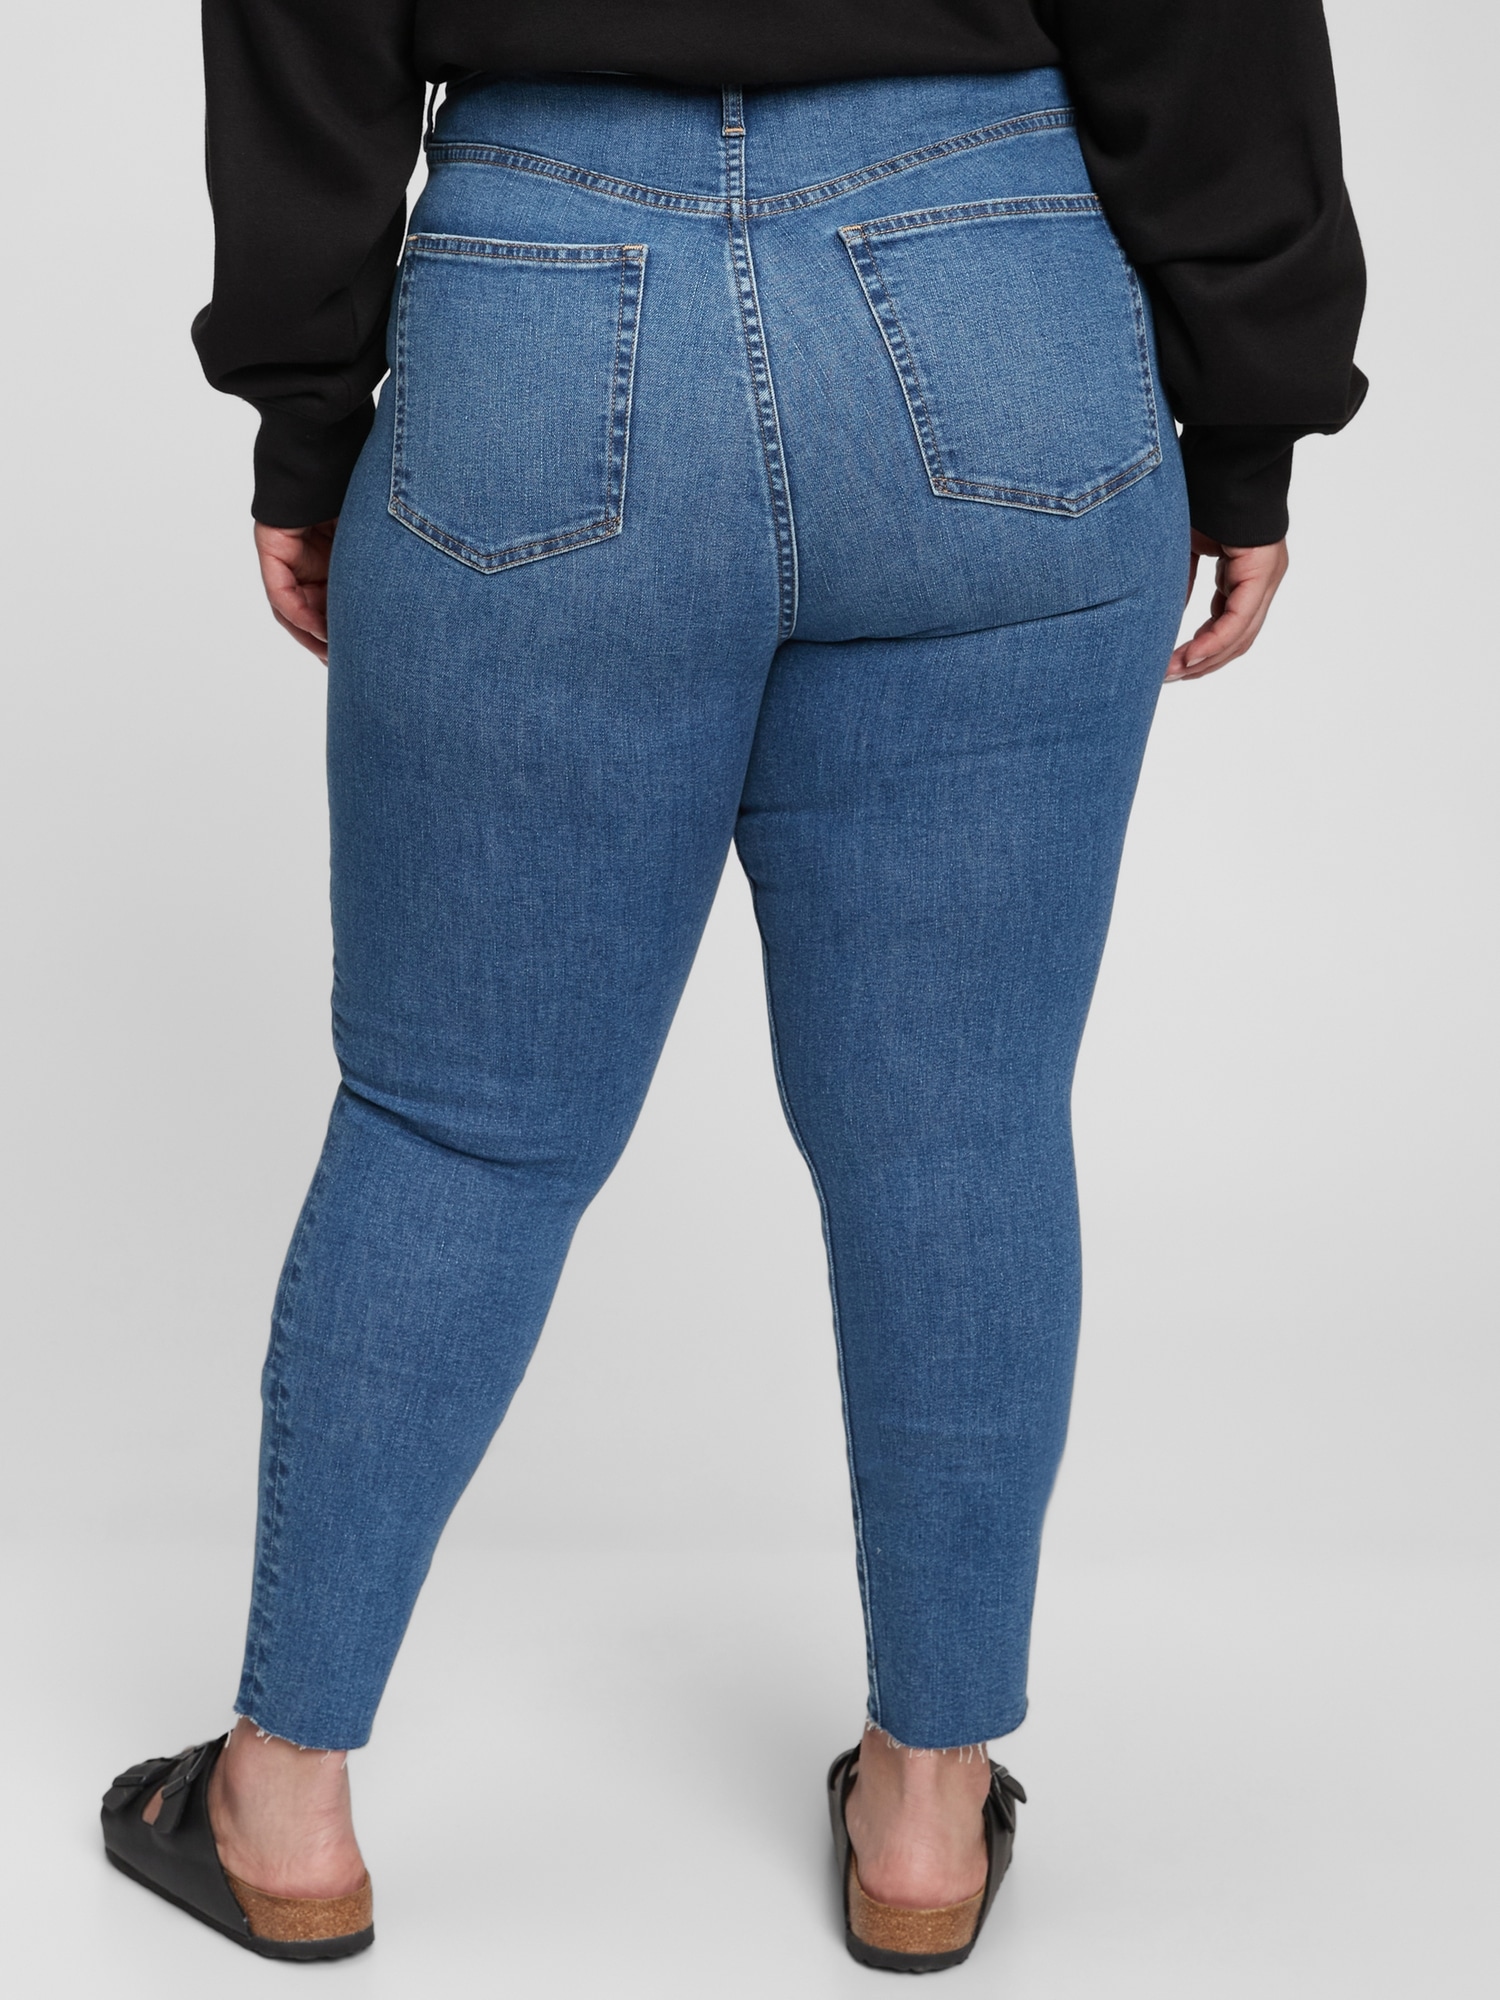 Real Denim High-Waisted Slim & Thick Curvy Jegging